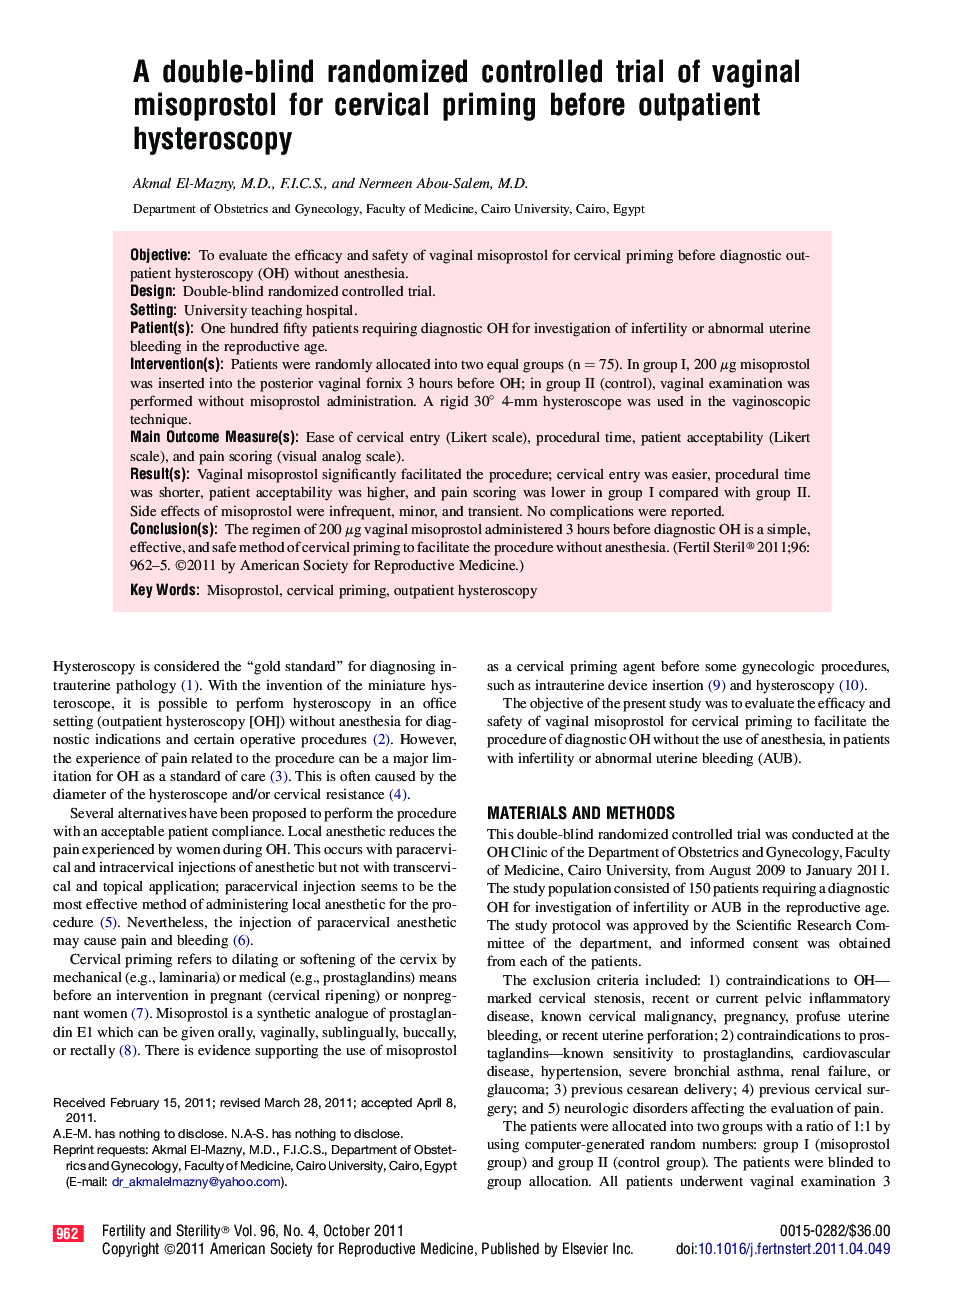 A double-blind randomized controlled trial of vaginal misoprostol for cervical priming before outpatient hysteroscopy 